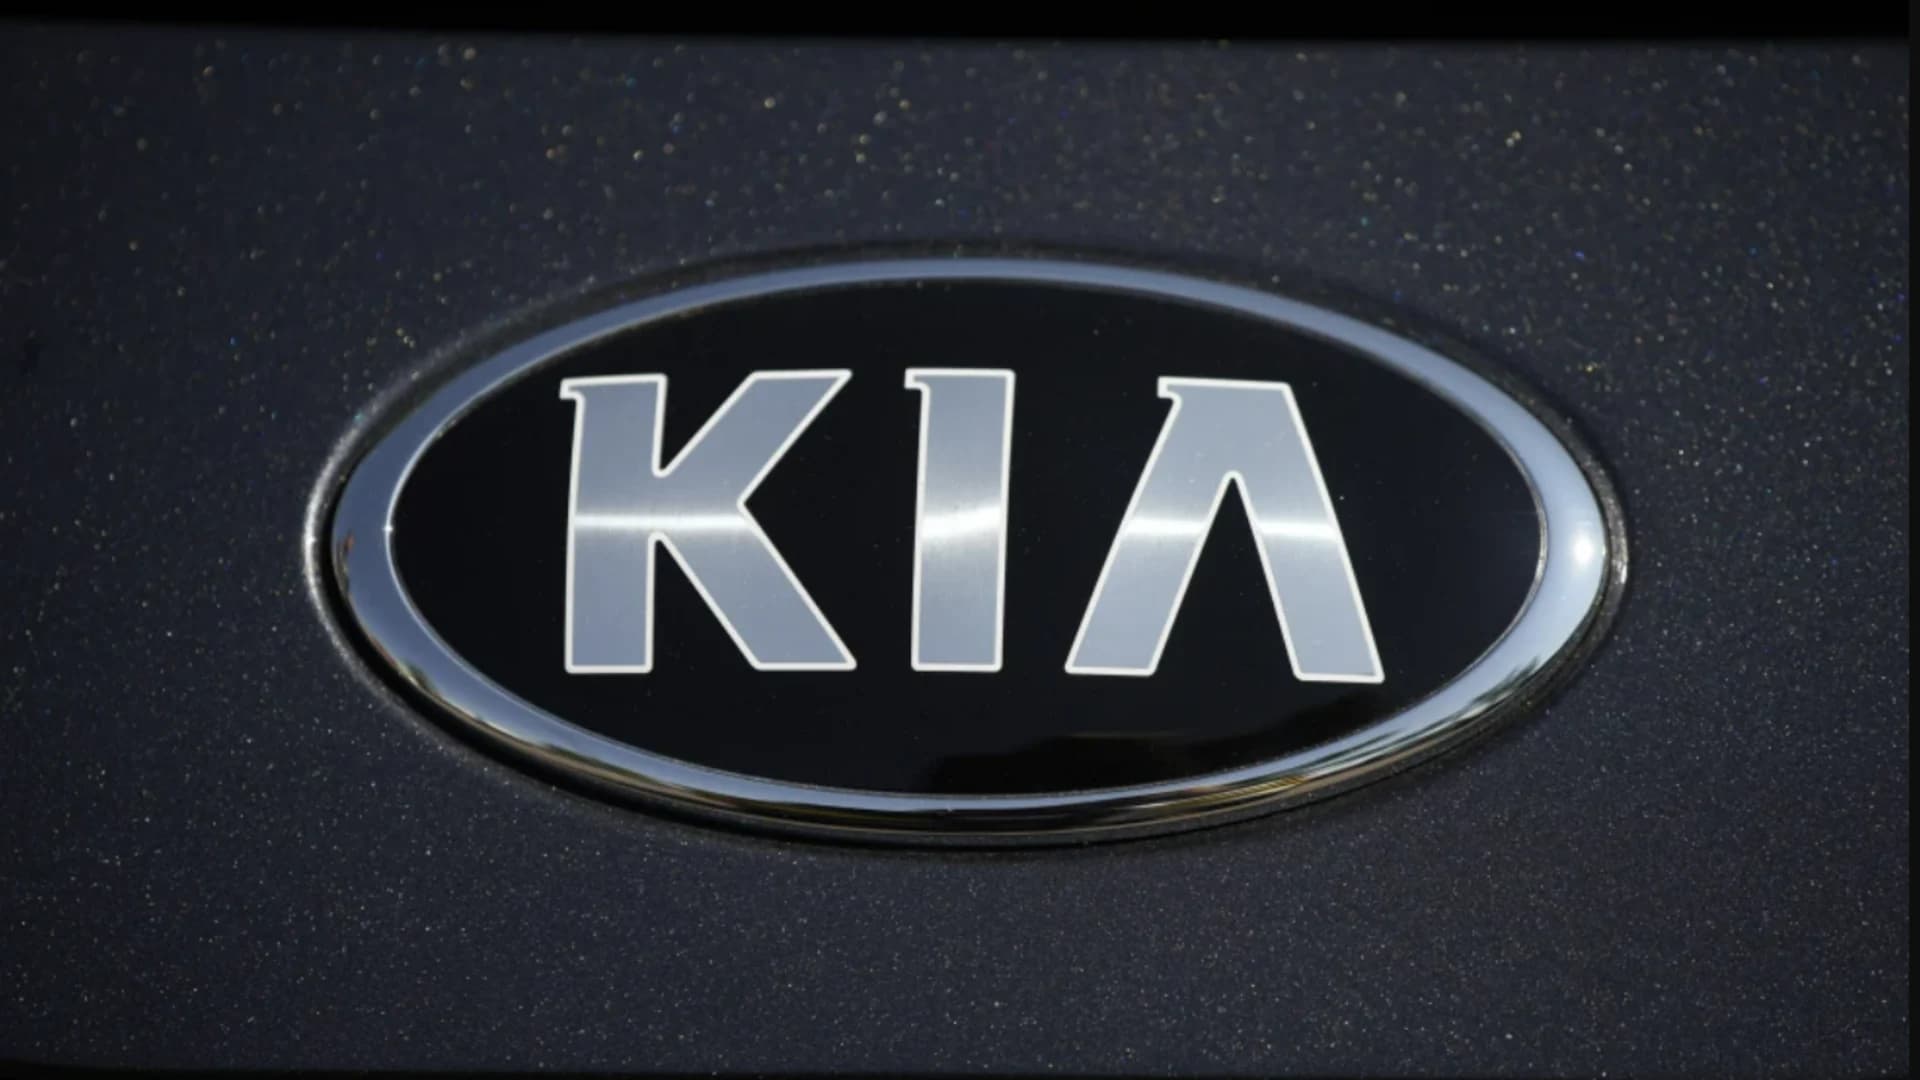 Kia recall to fix trunk latch that won’t open from the inside, which could leave people trapped